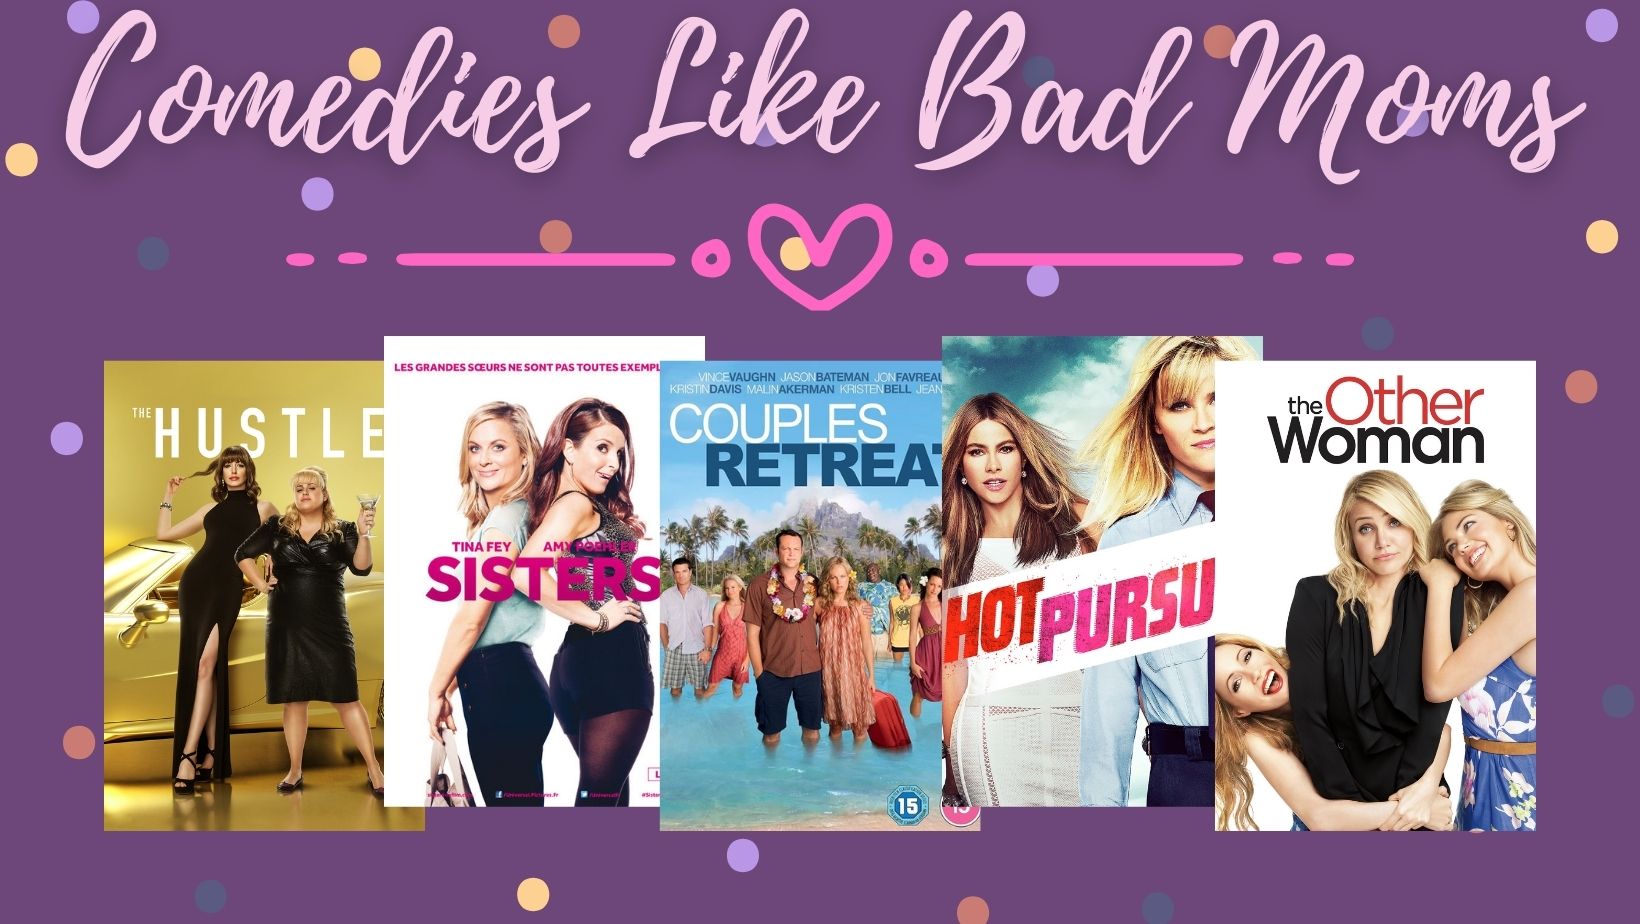 Like This Watch That: 25 Comedy Movies Like Bad Moms